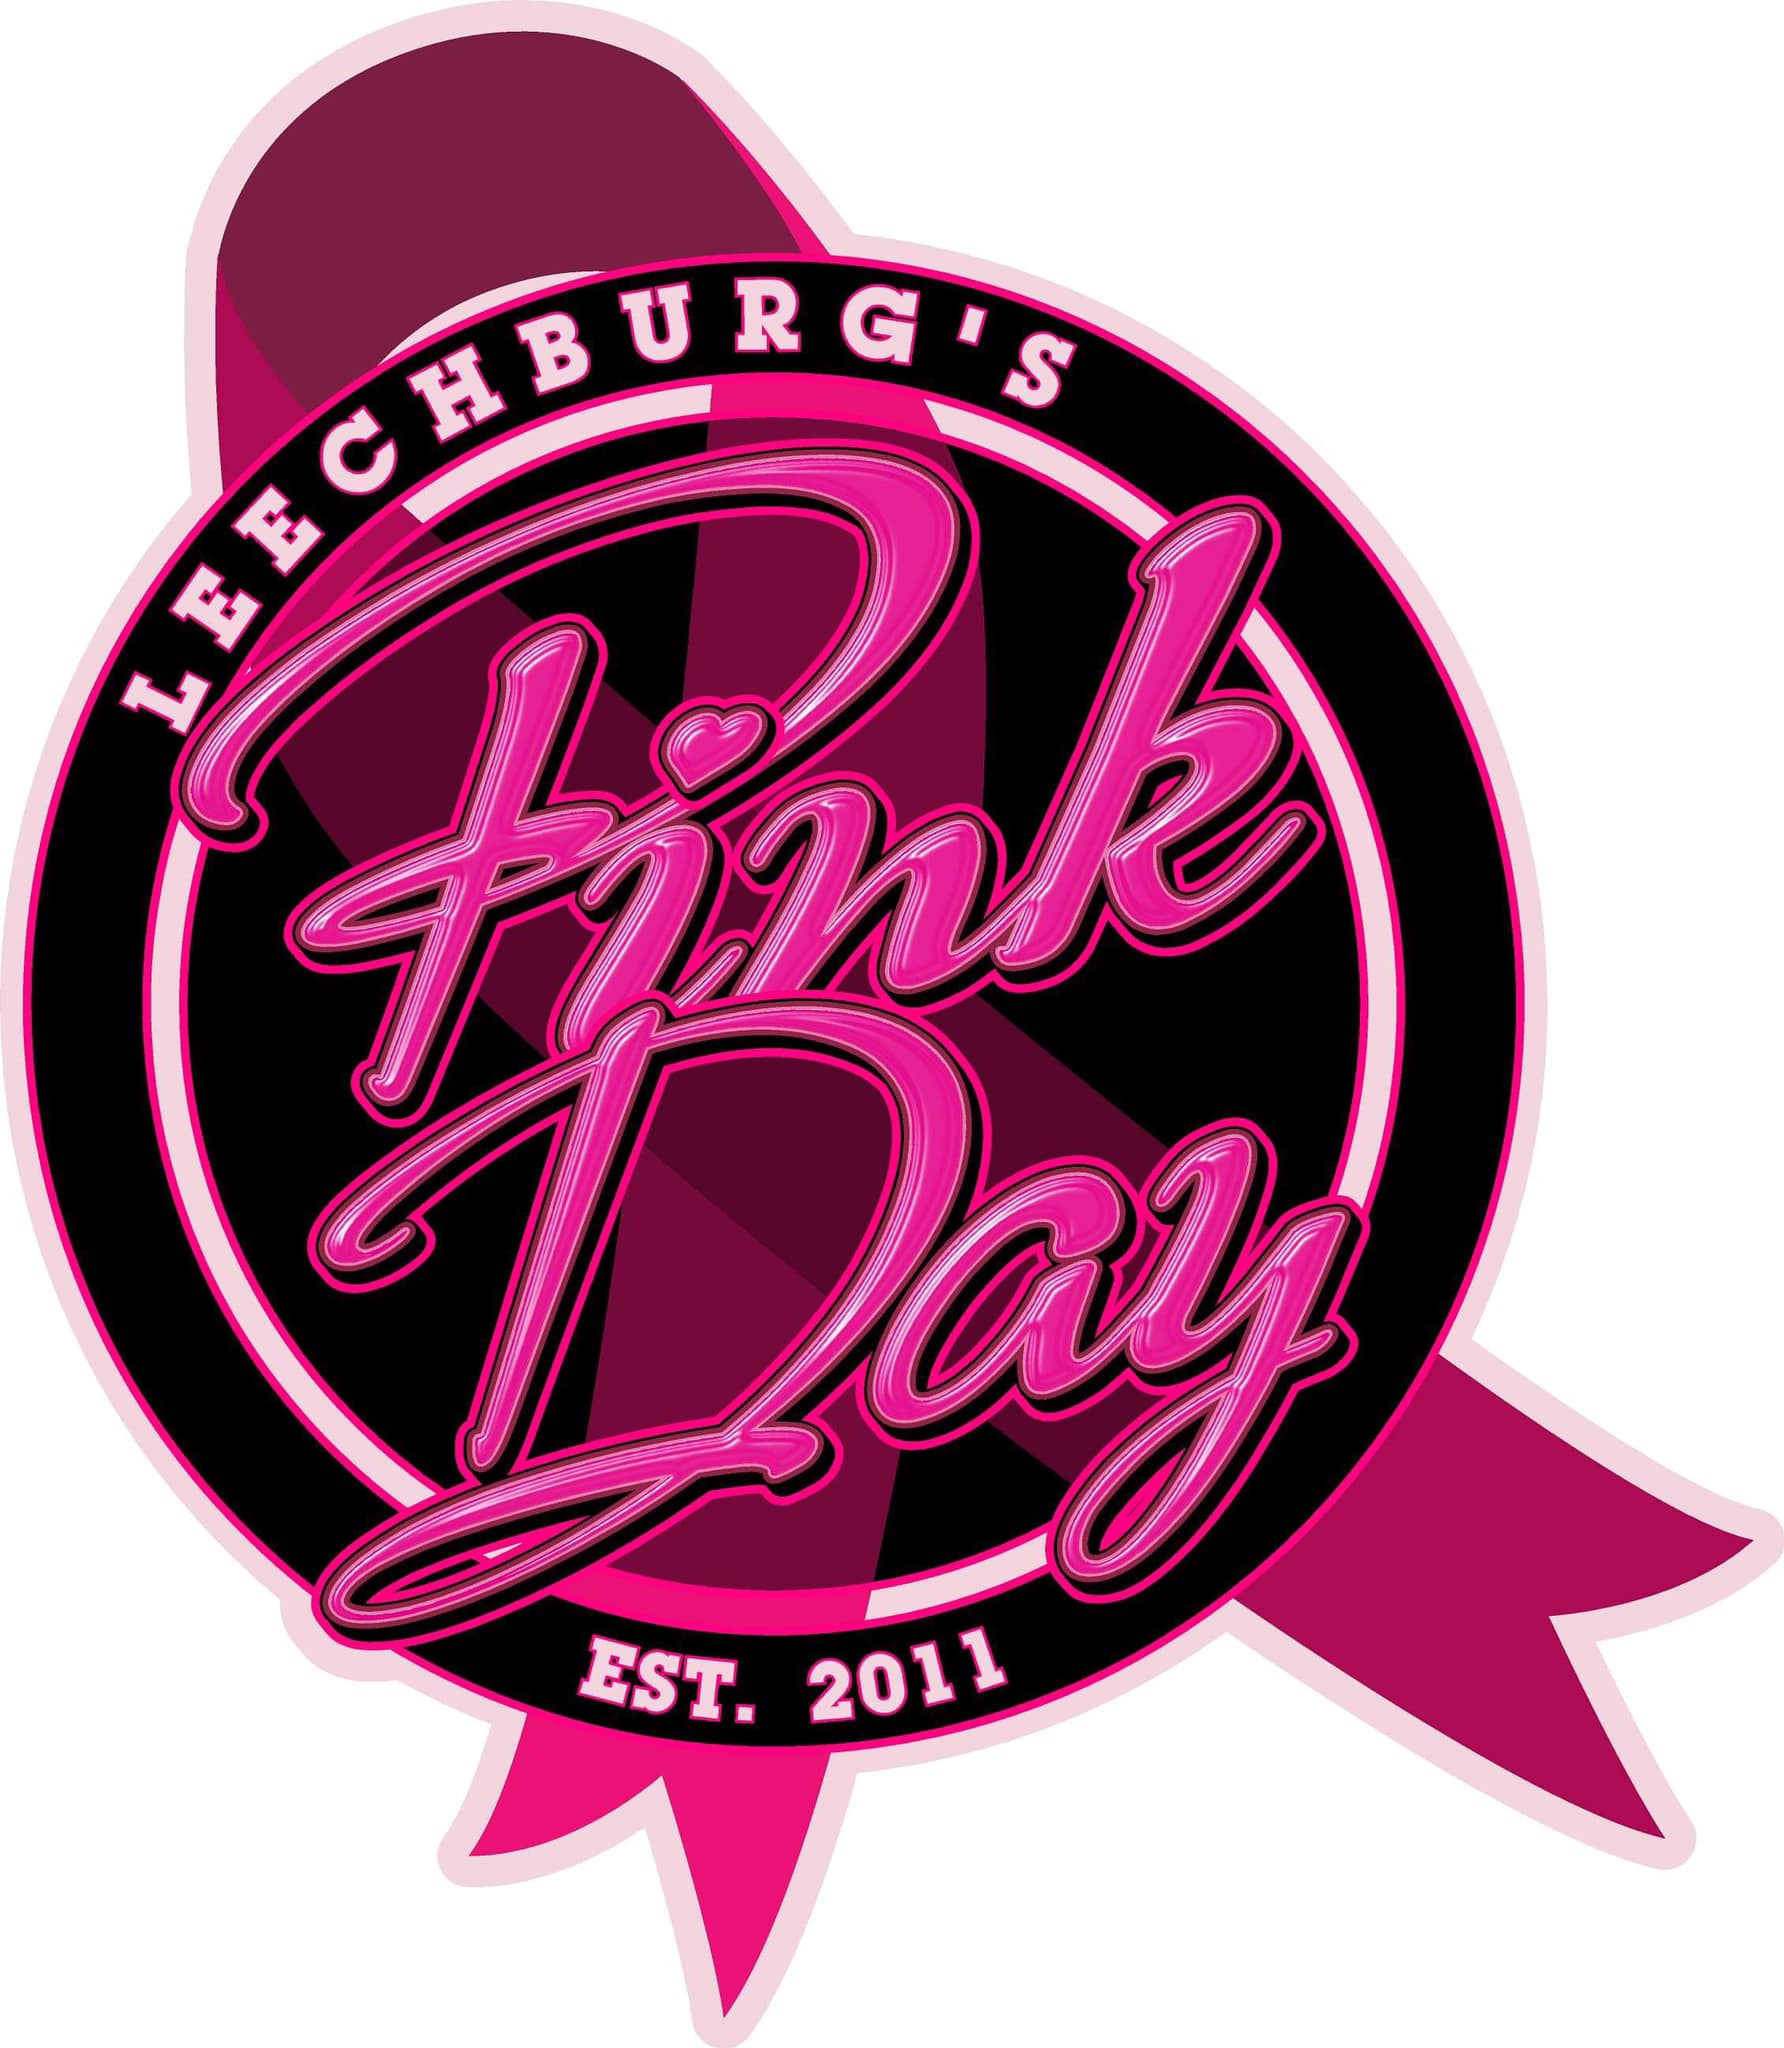 Leechburg’s 13th Annual Pink Day Celebration and Fundraising Event